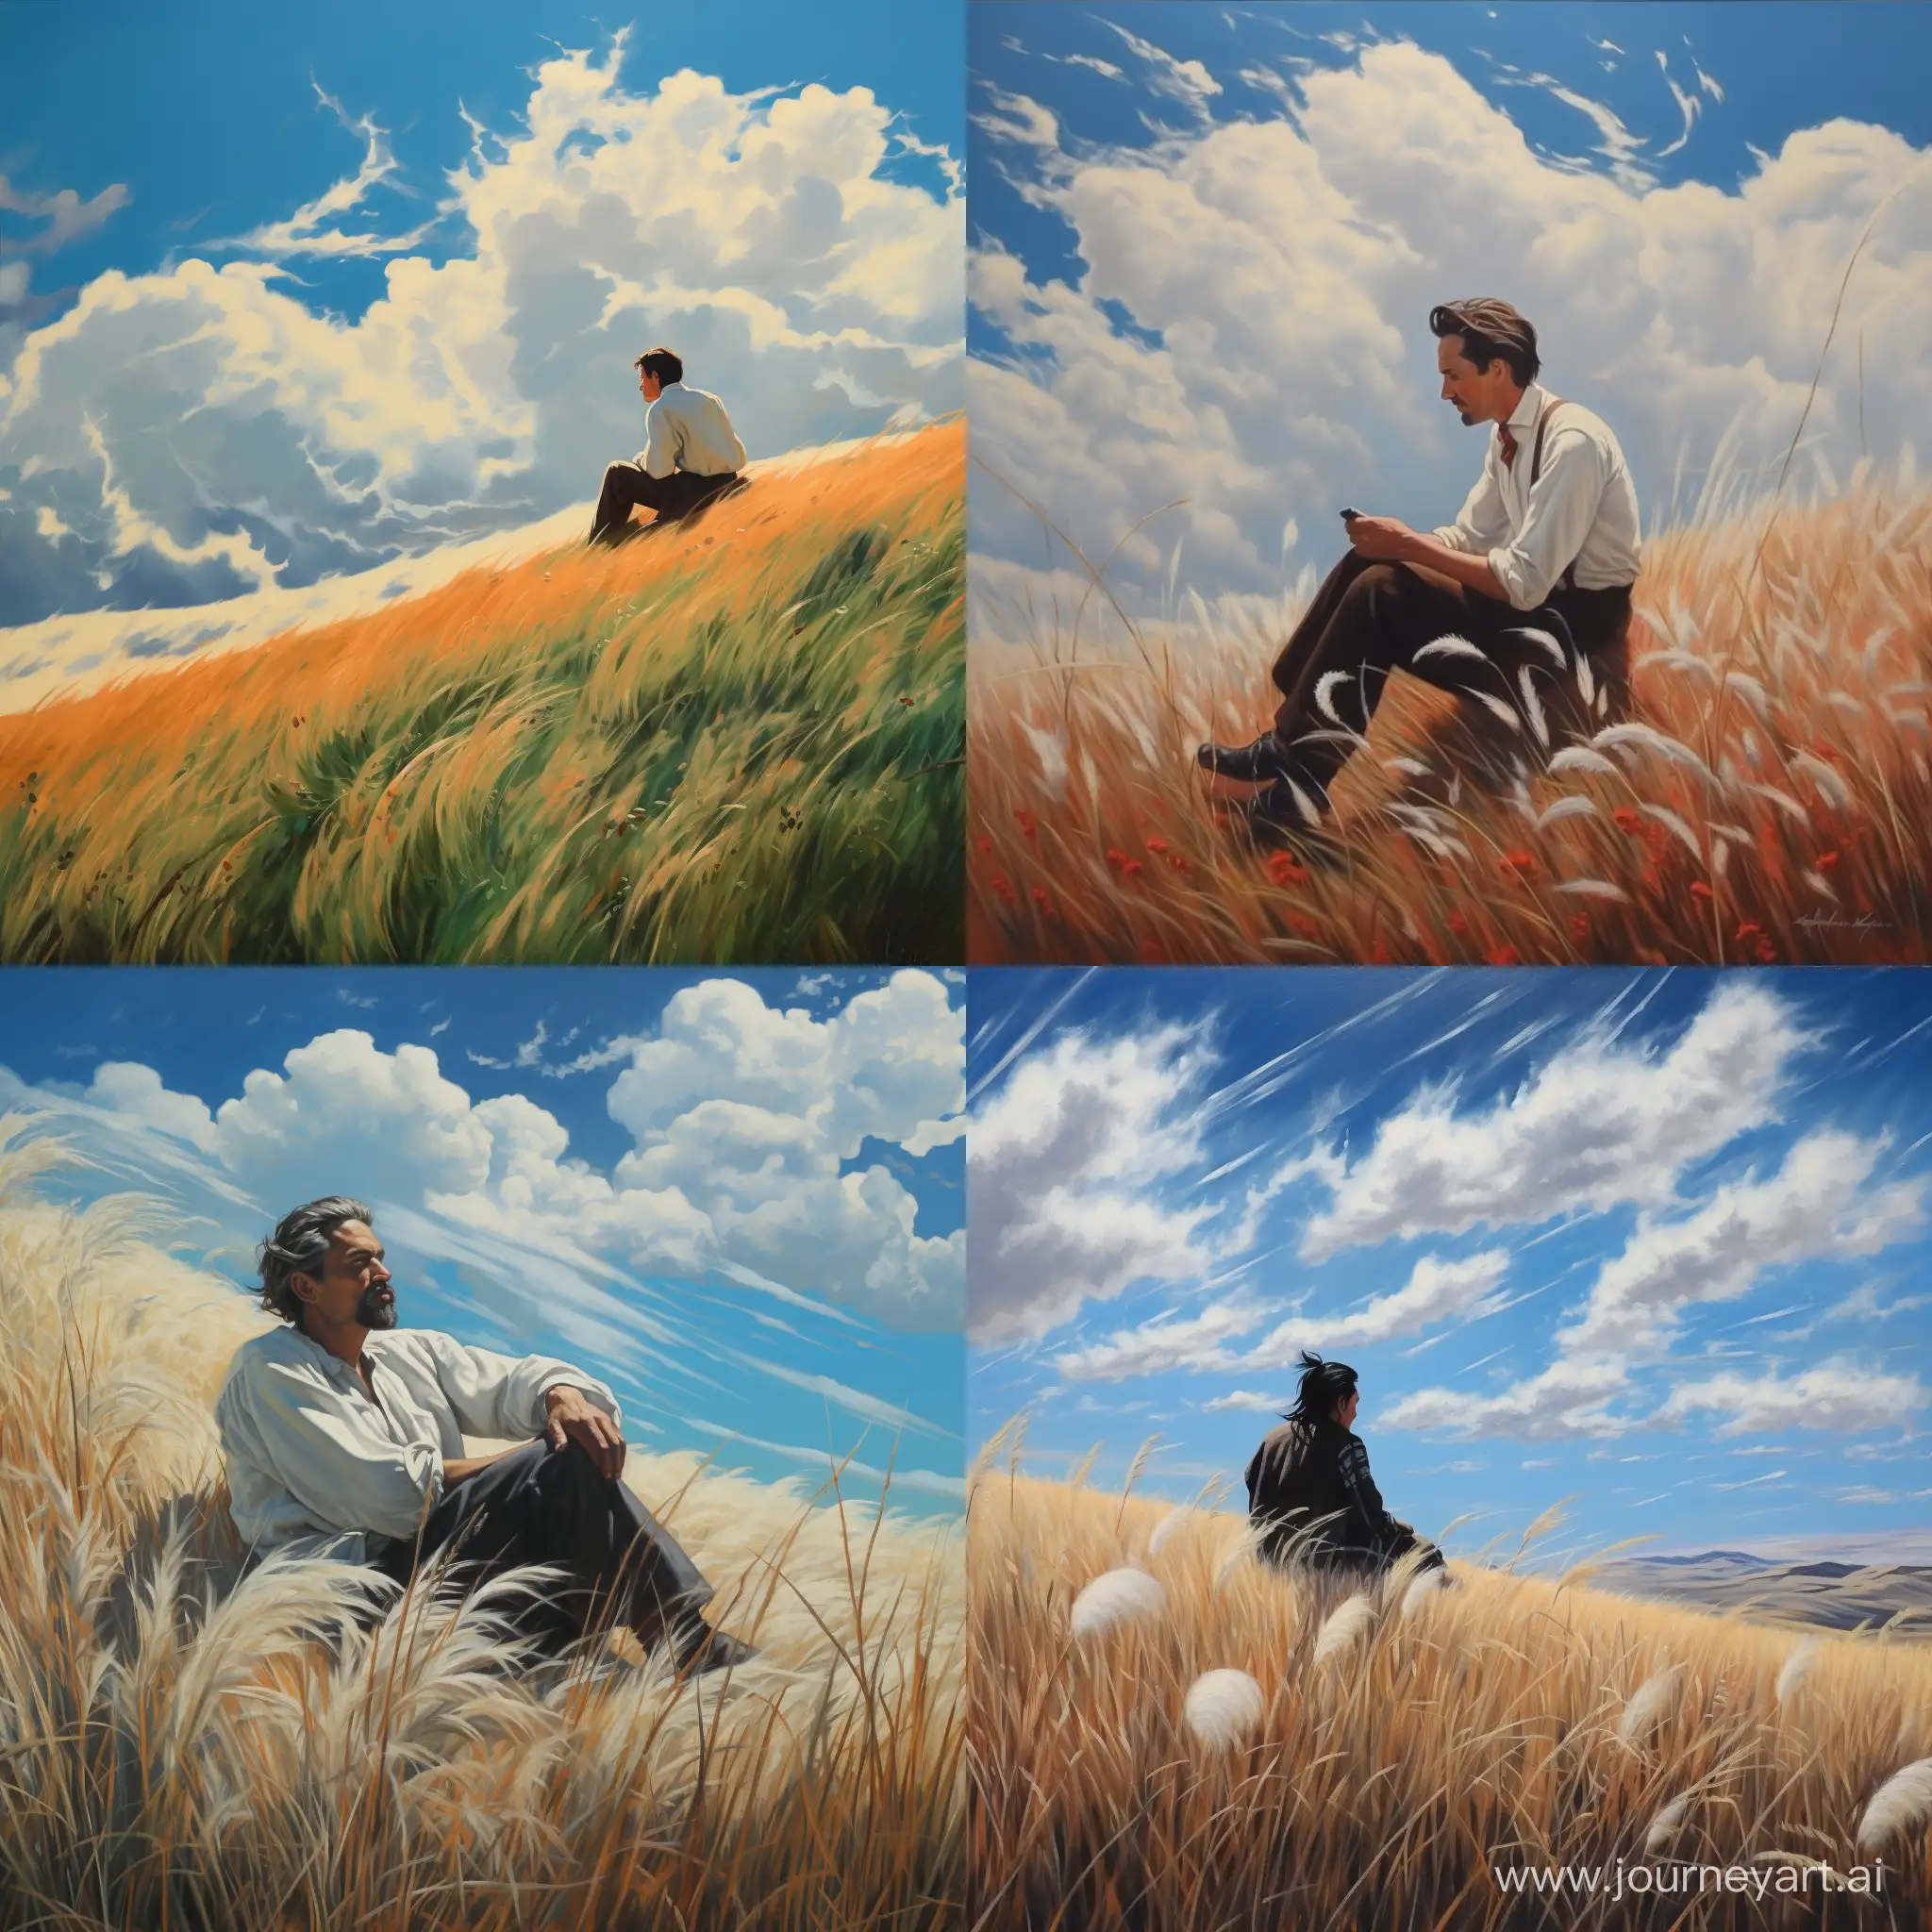 Solitary-Man-Contemplating-on-Turquoise-Hill-Overlooking-Feather-Grass-Steppe